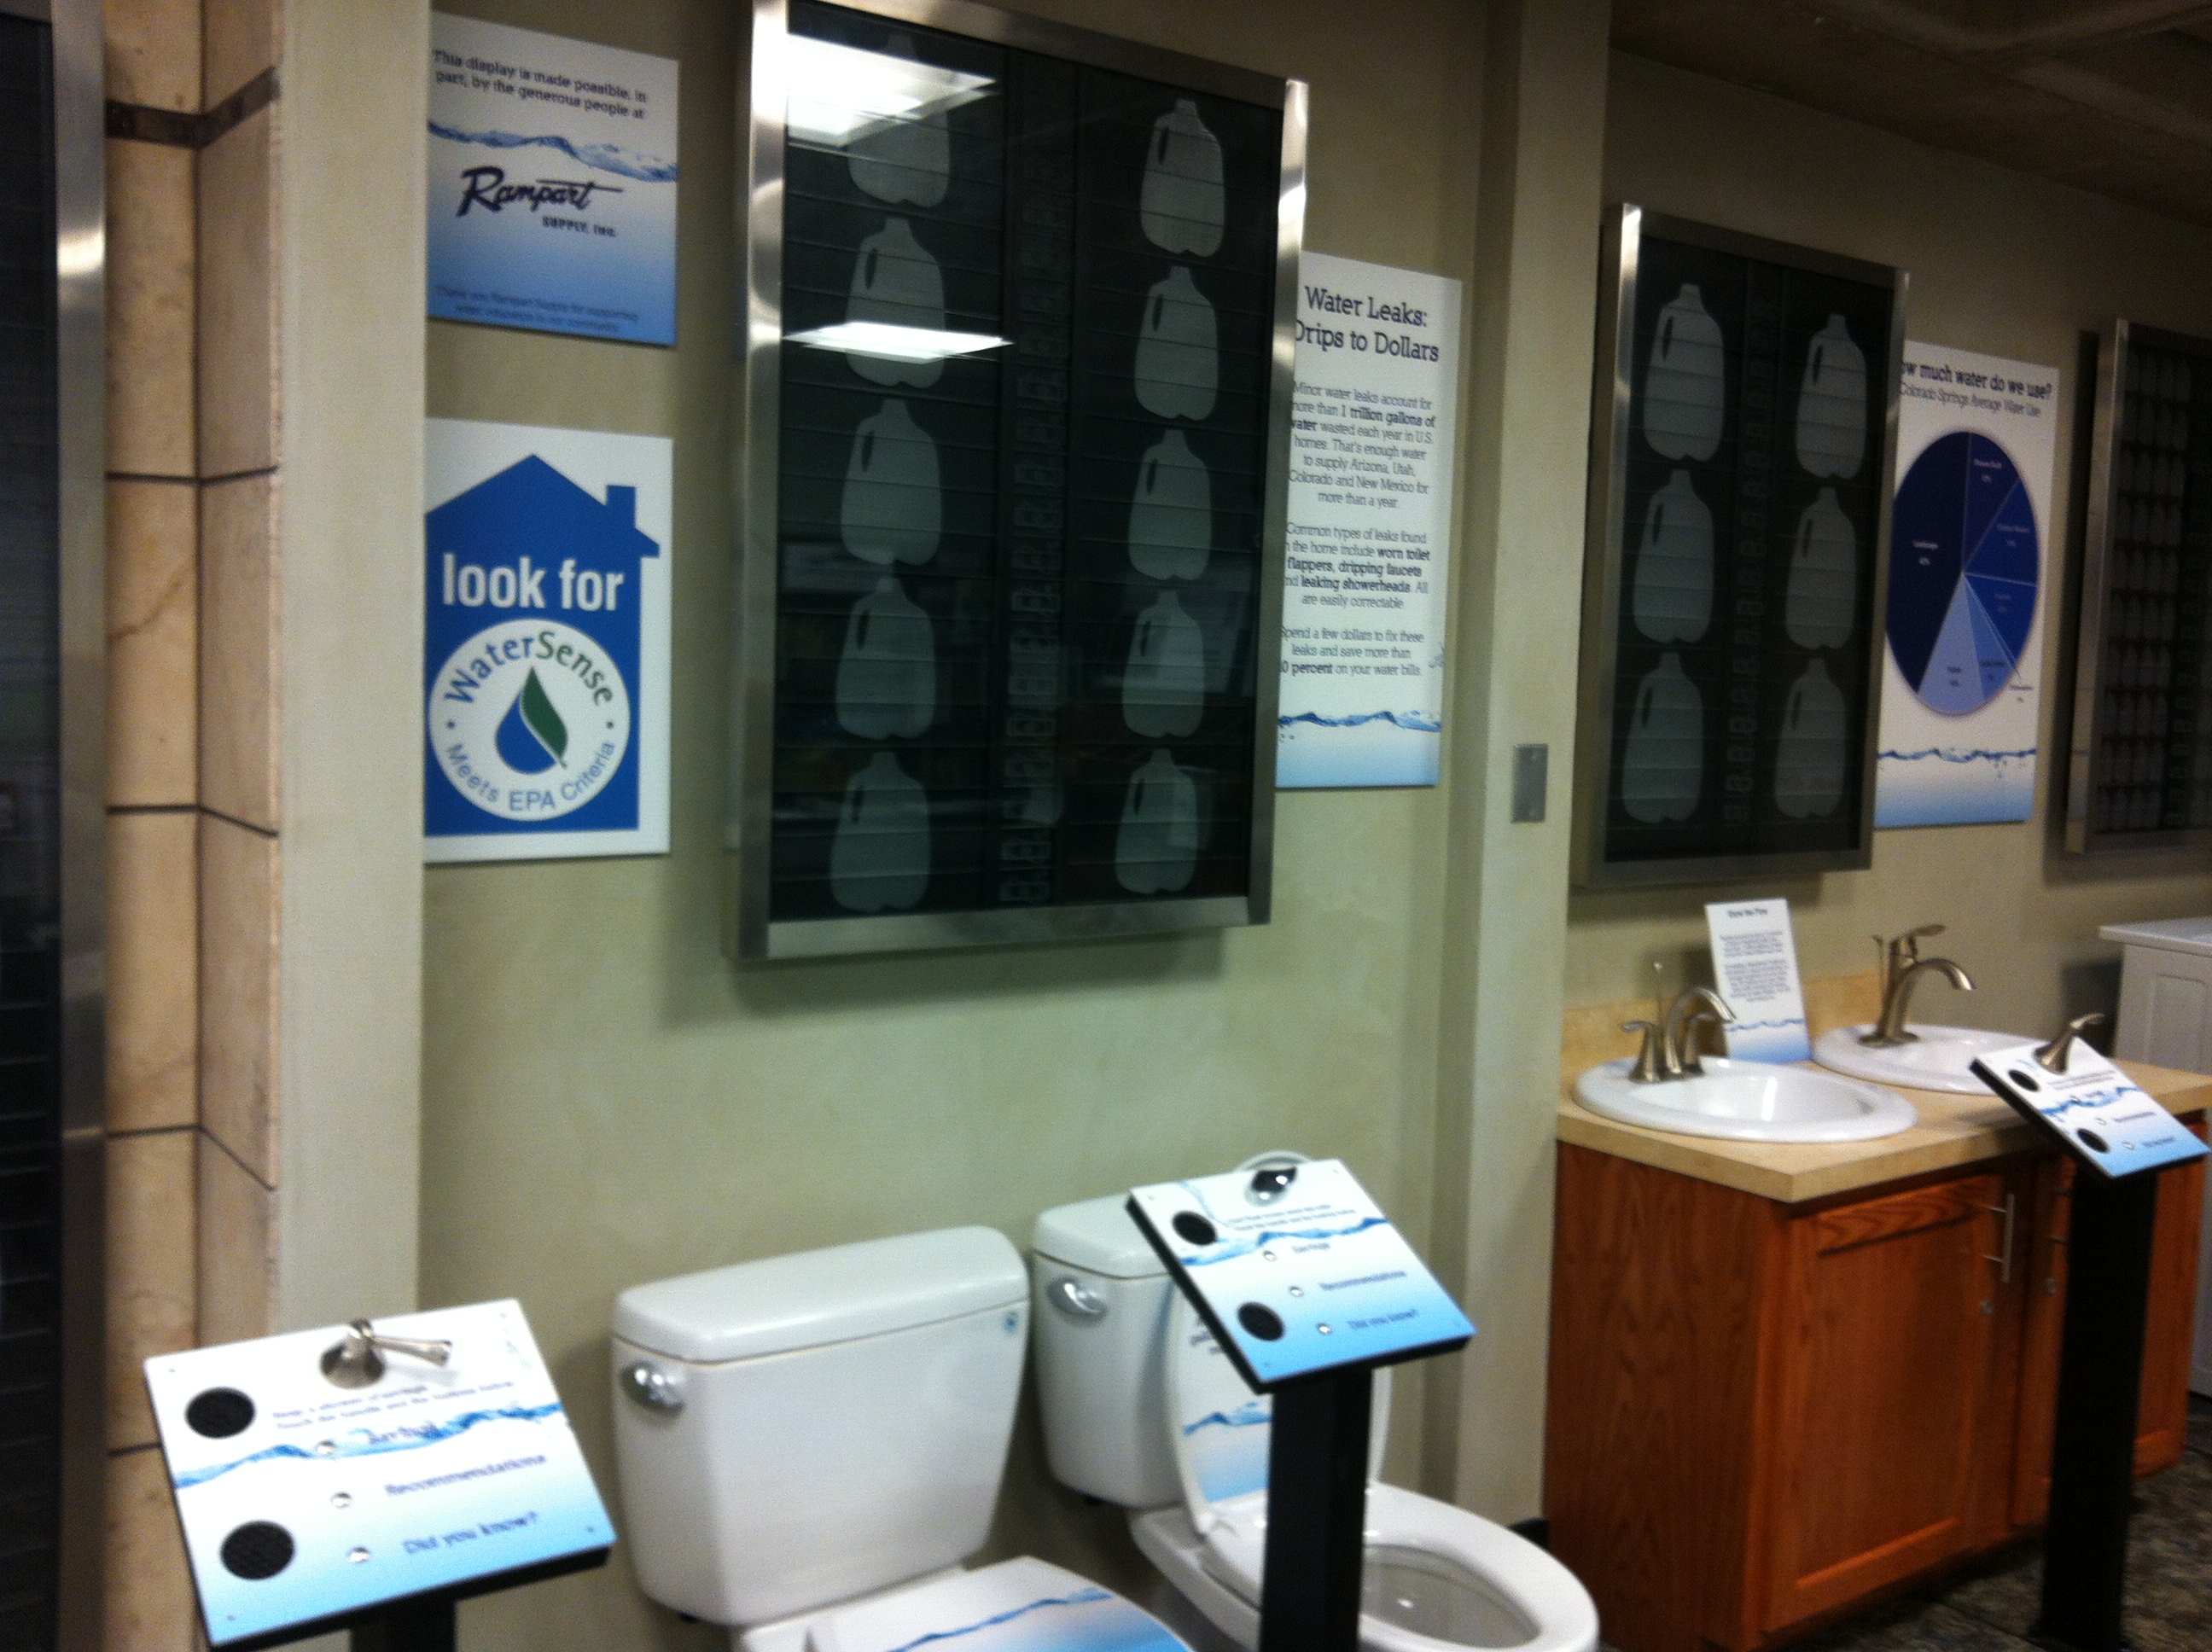 Colorado Springs Utilities educates customers both in the classroom and at the utilities' offices. This wall of water helps people visualize water savings.